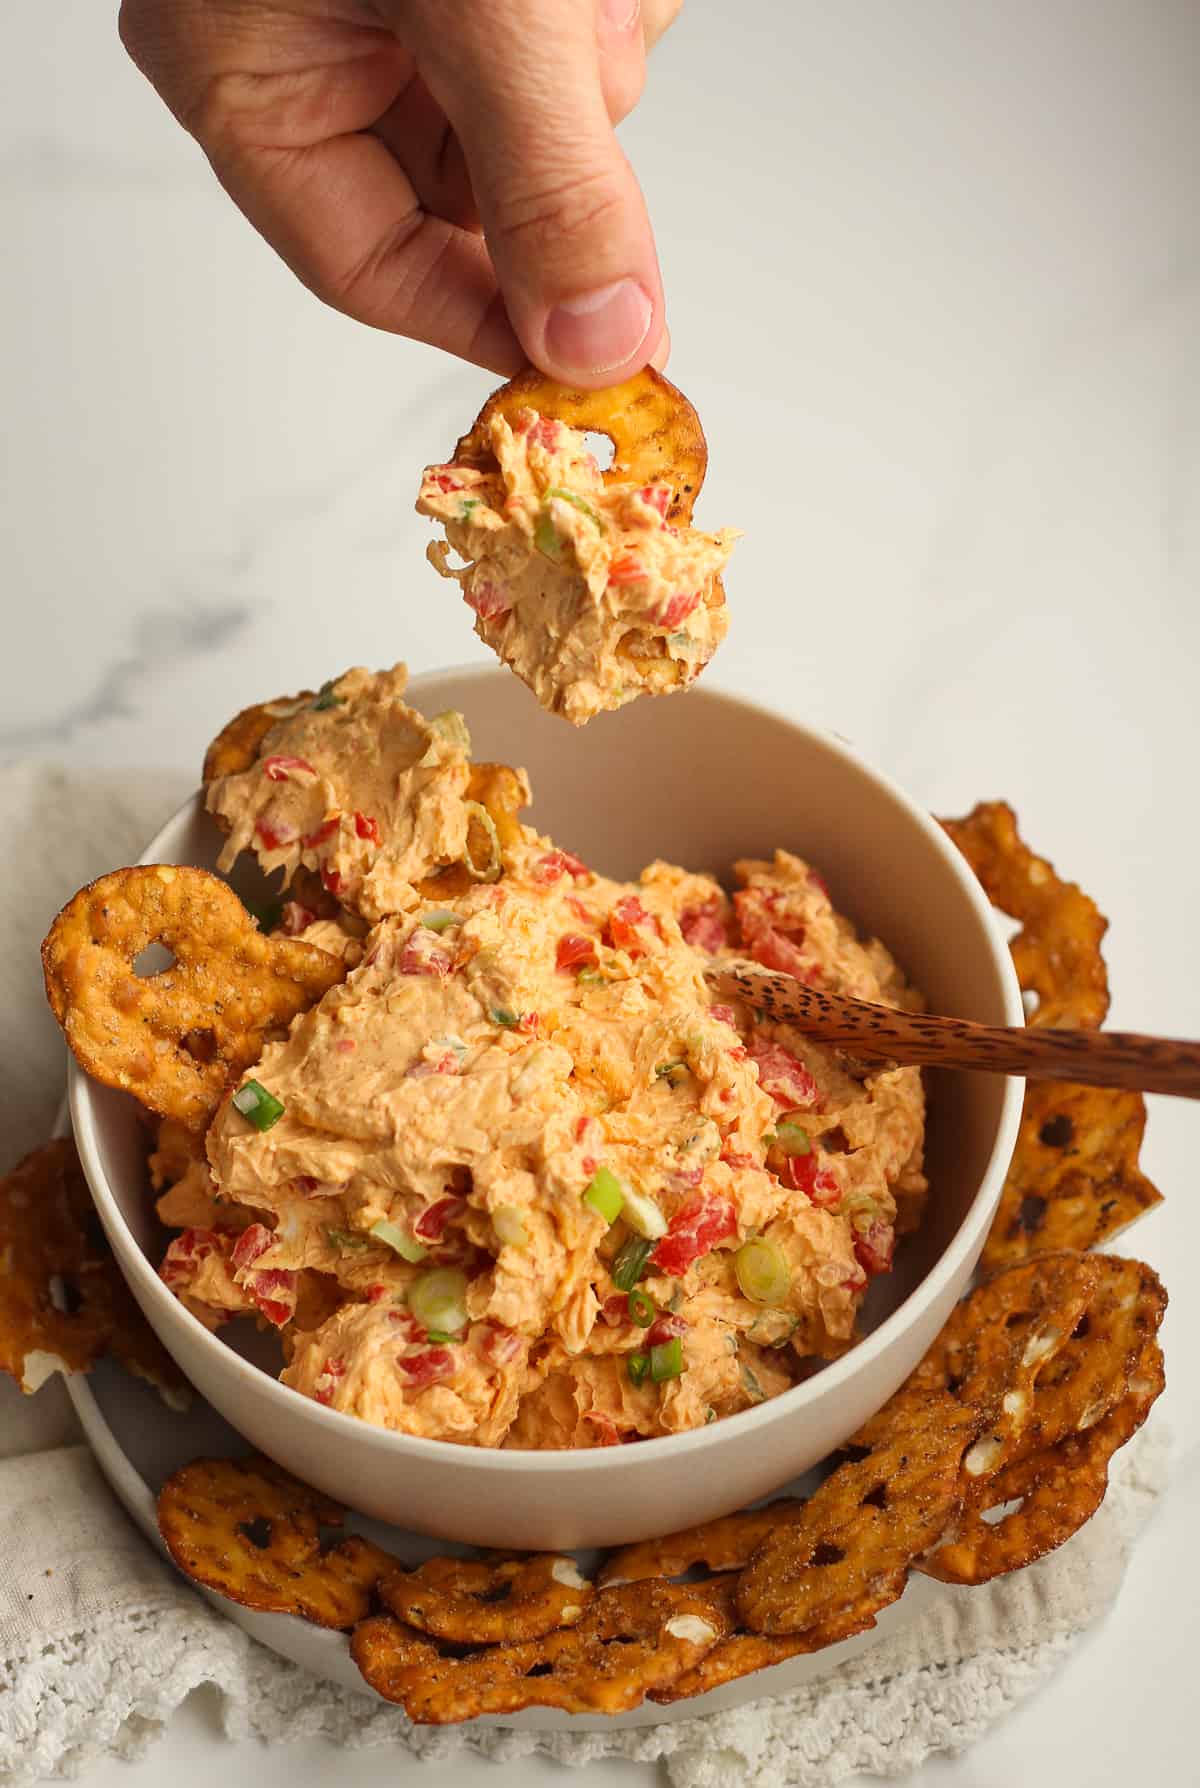 A hand holding a pretzel crisp with pimento cheese on it.